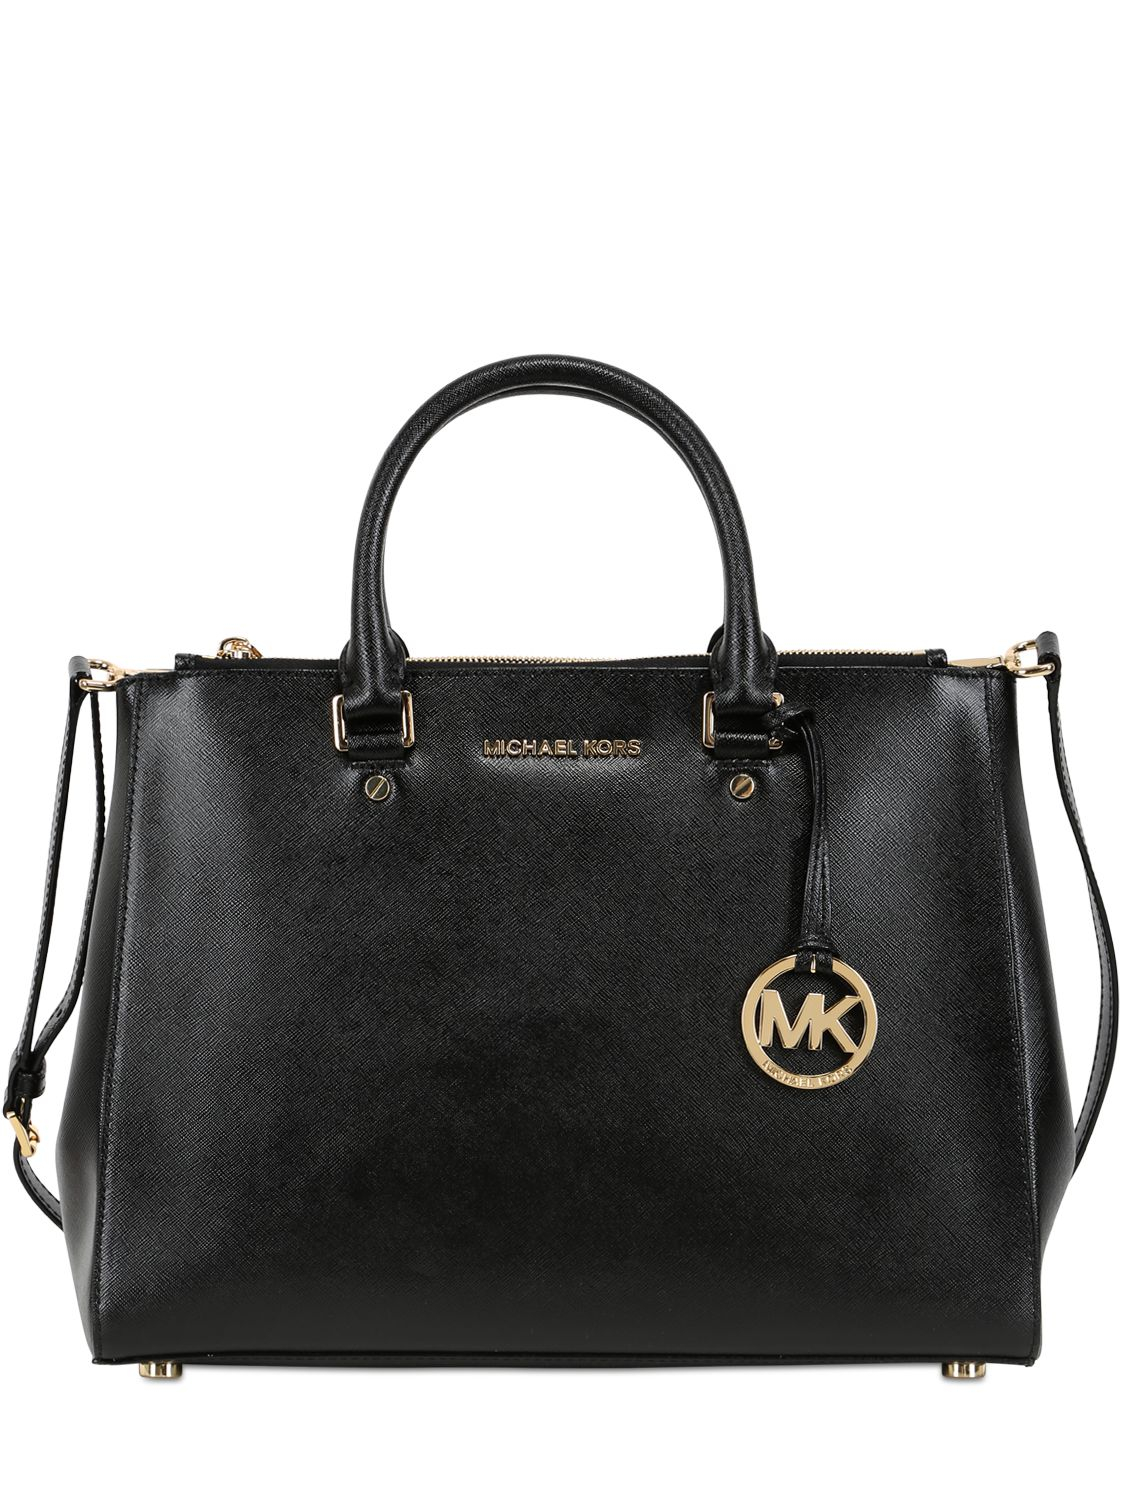 Michael By Michael Kors Large Sutton Saffiano Patent Leather Bag in ...